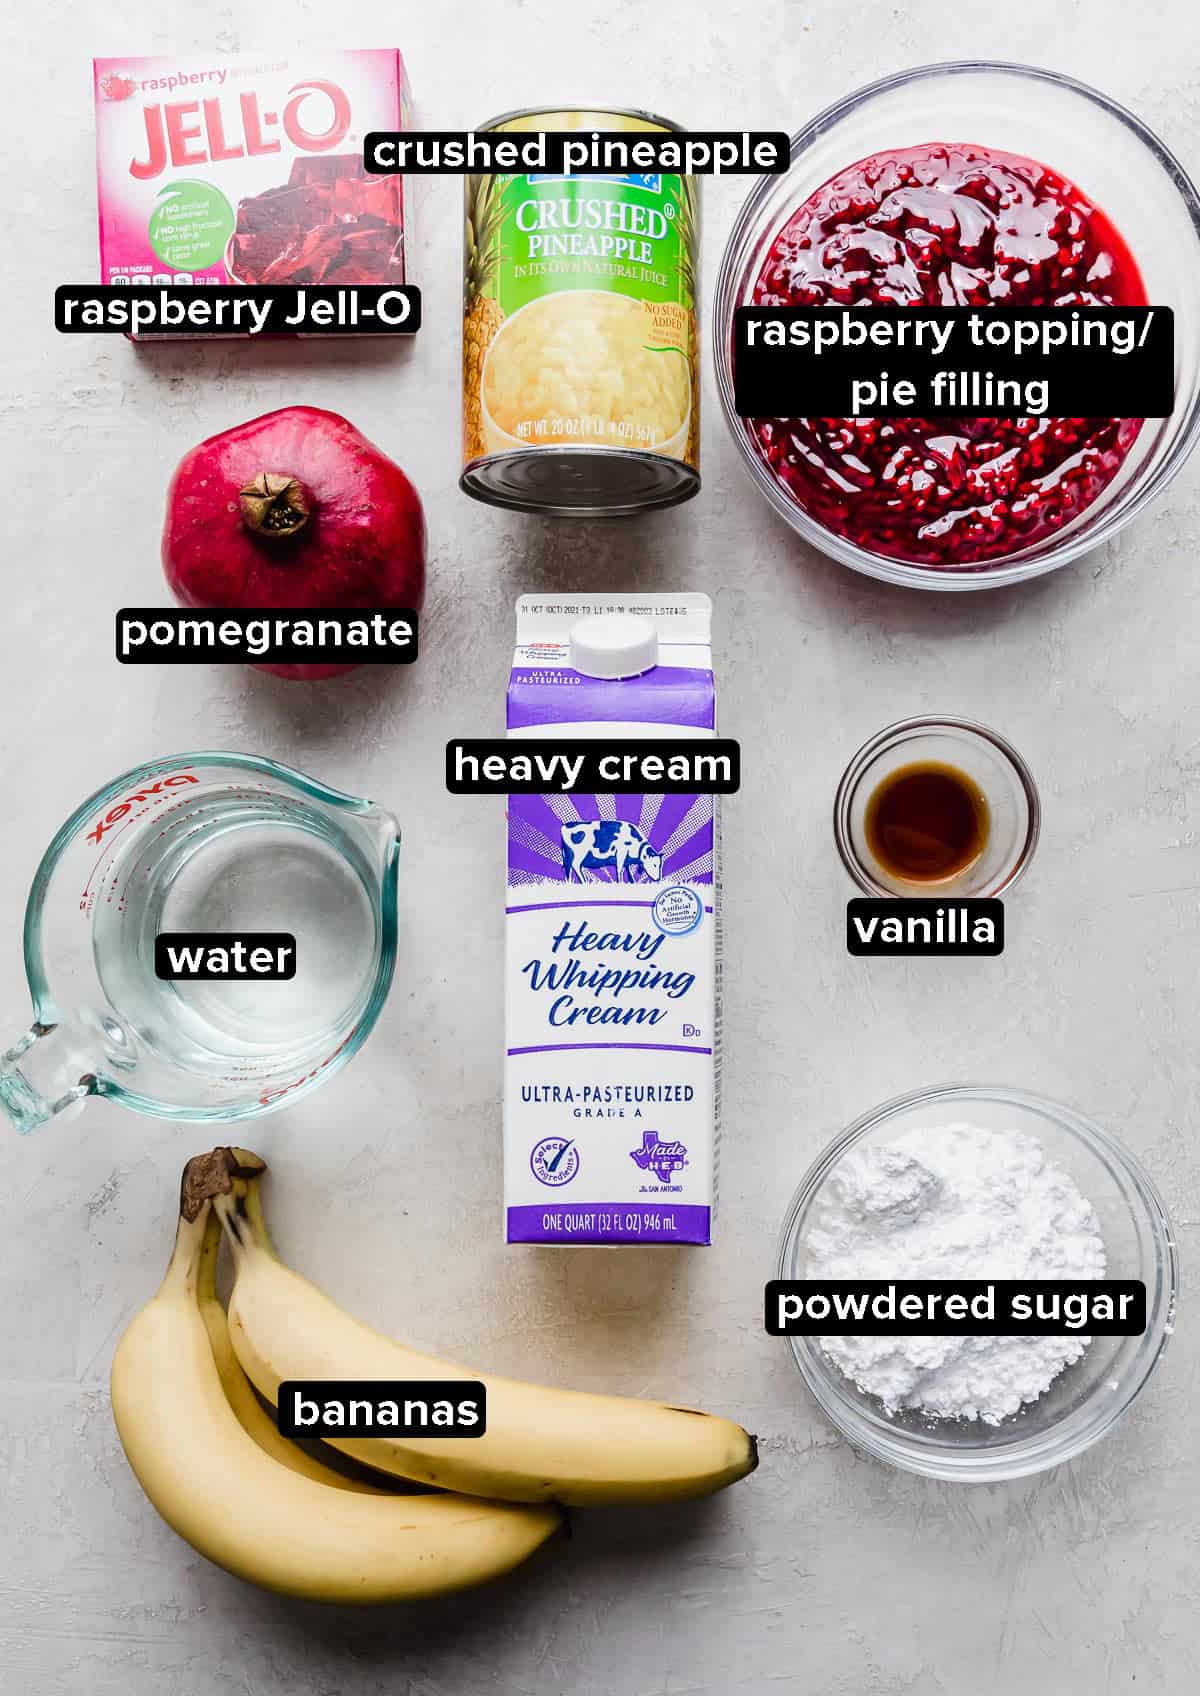 Pomegranate Jell-O ingredients laid out on a gray background.